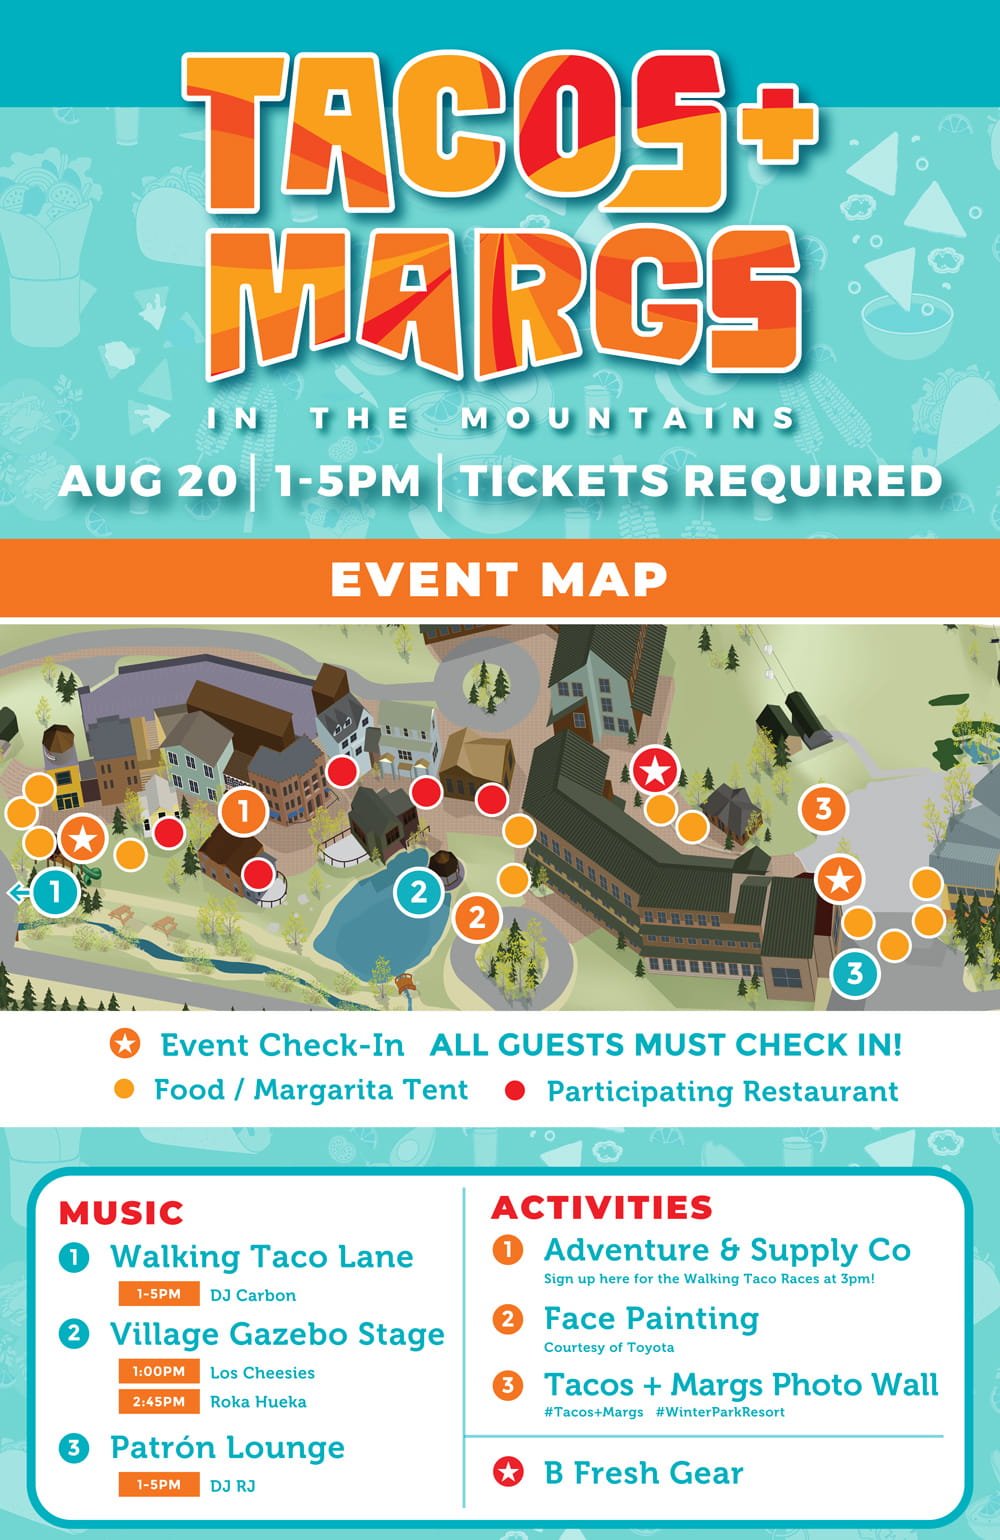 Tacos and Margs Event Map